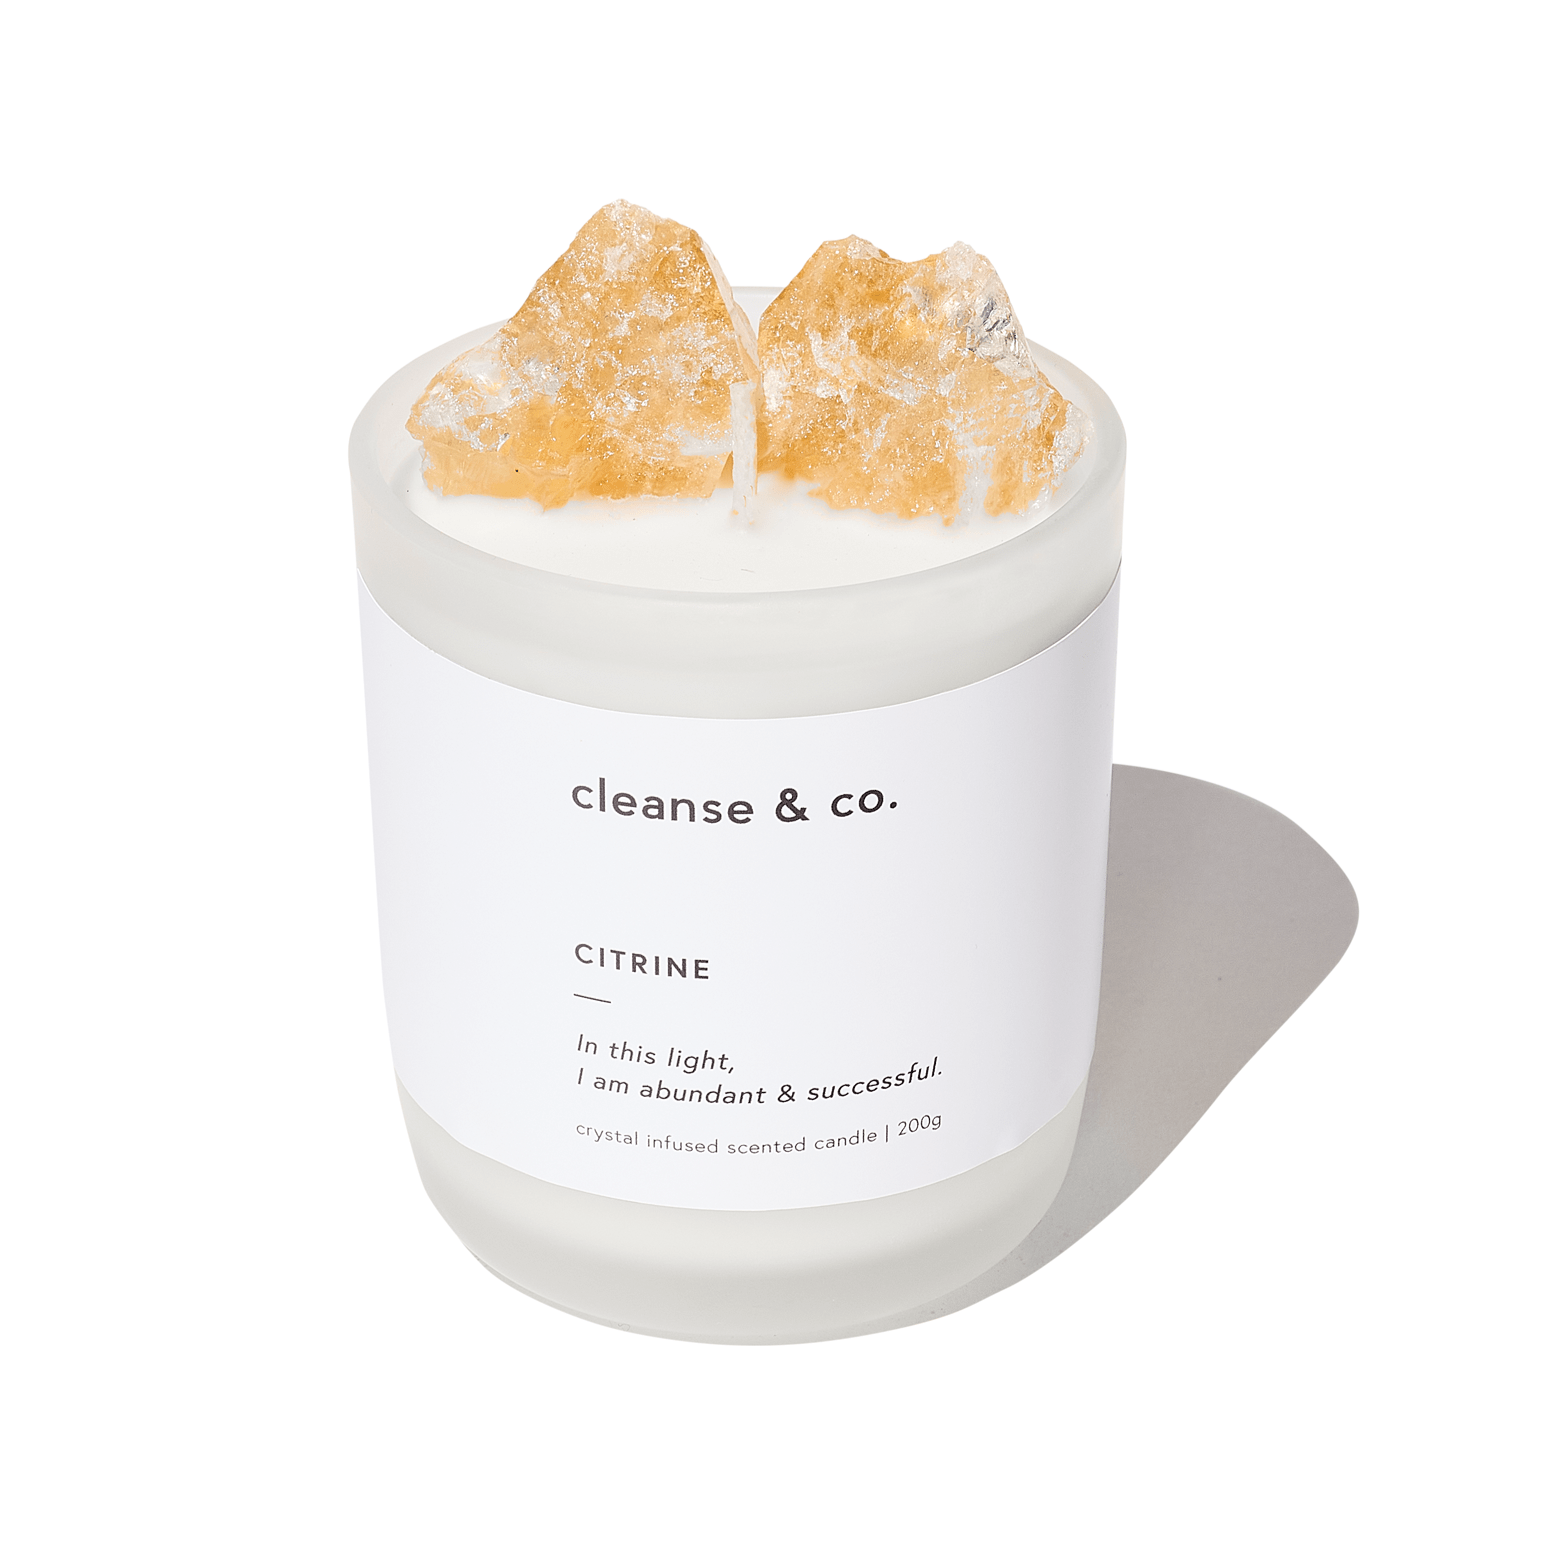 citrine crystal candle by Cleanse & Co.